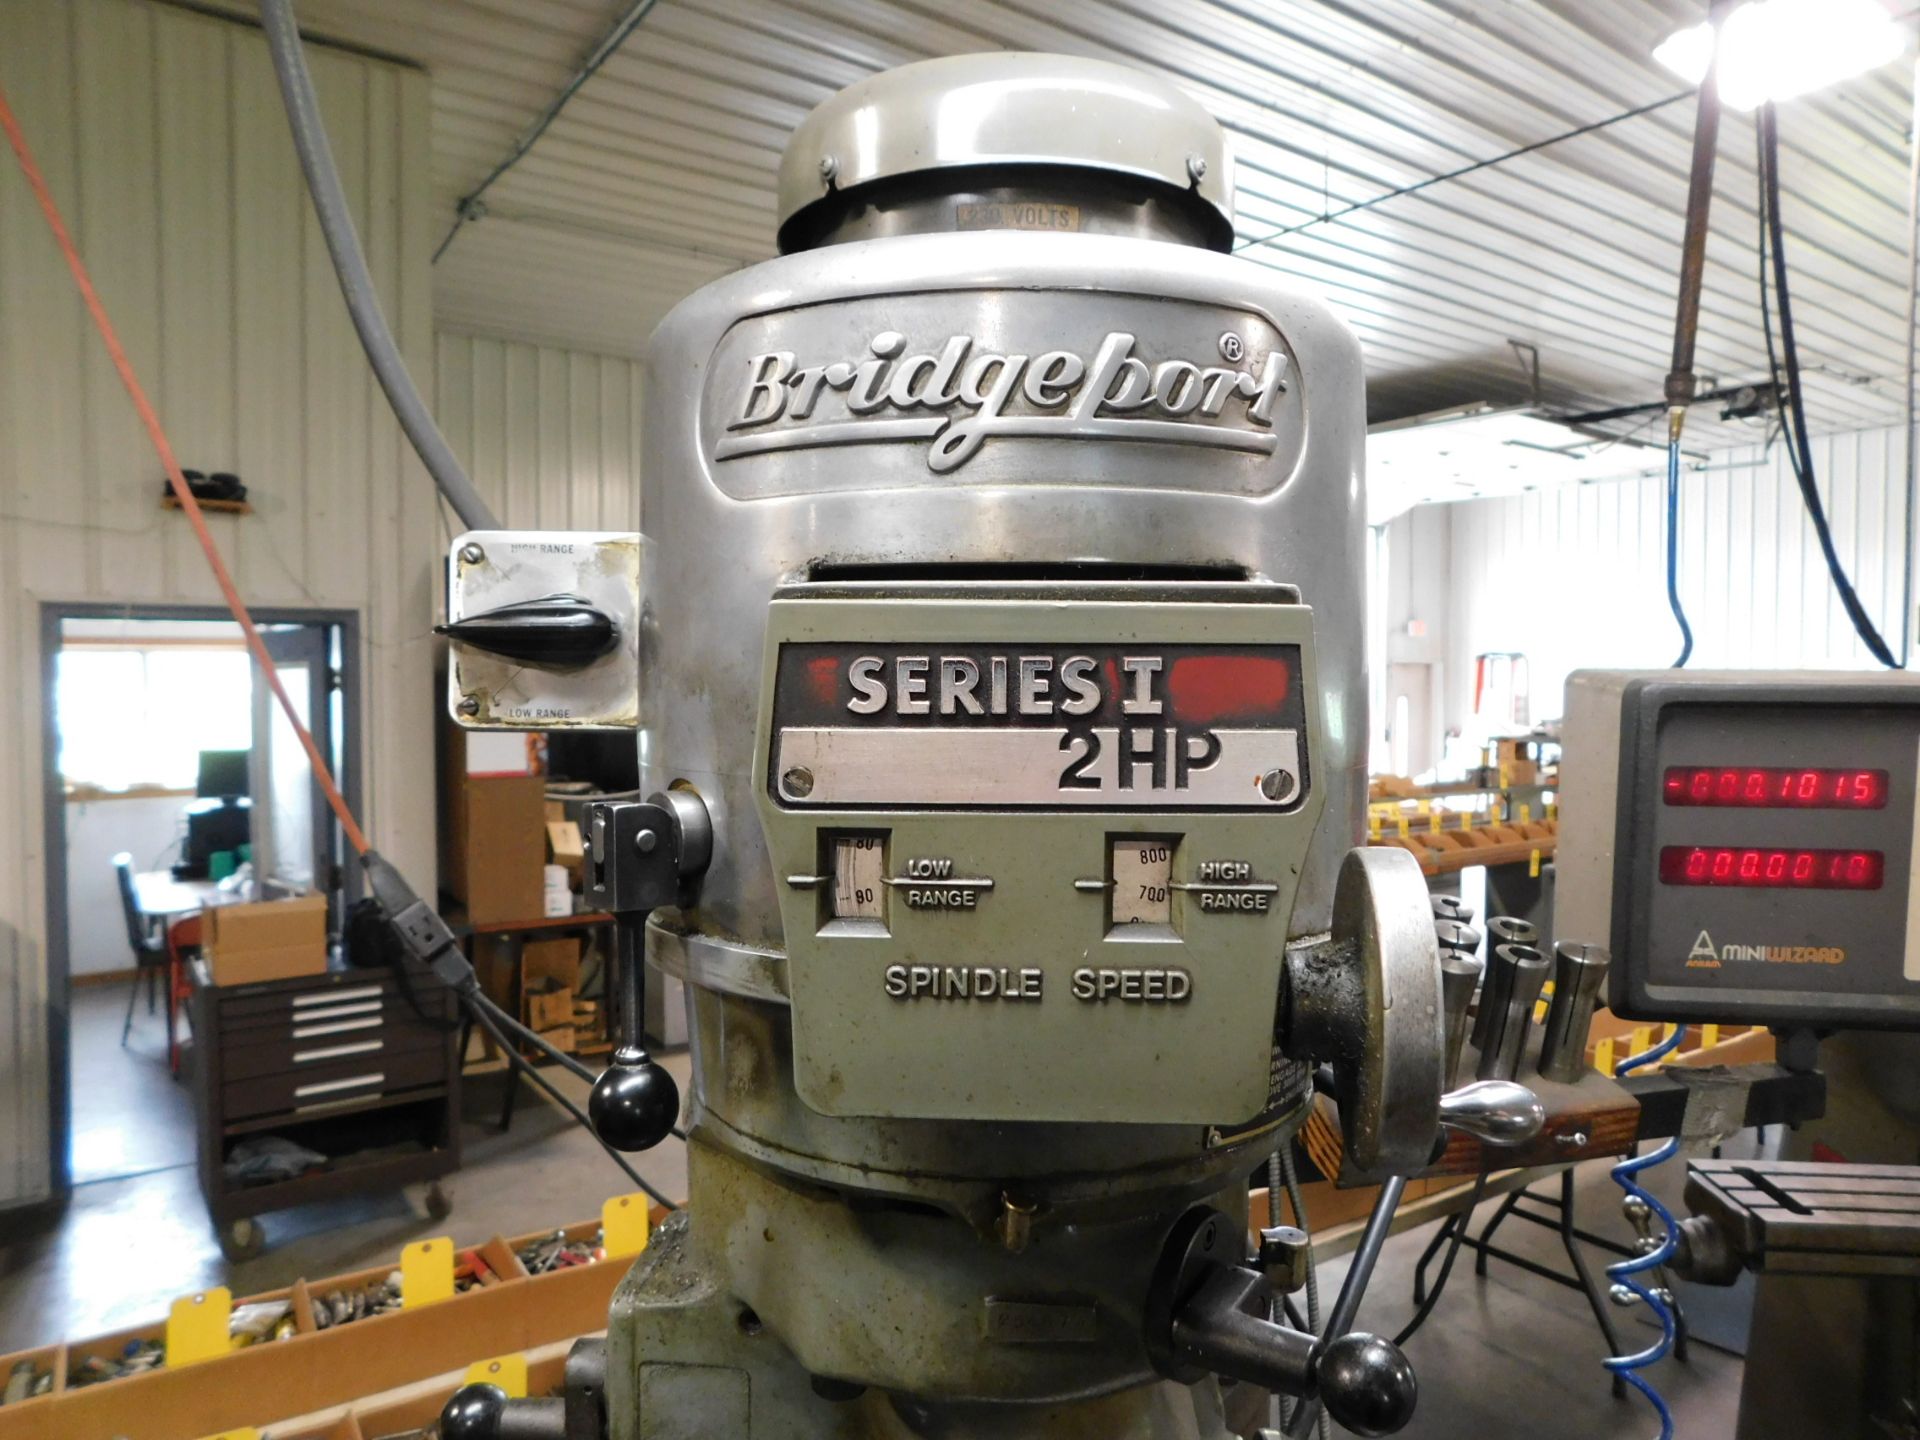 Bridgeport Series I 2H.P. Vertical Mill sn# 12BR235748, 9"X48" Table, Servo Table Powerfeed, - Image 7 of 11